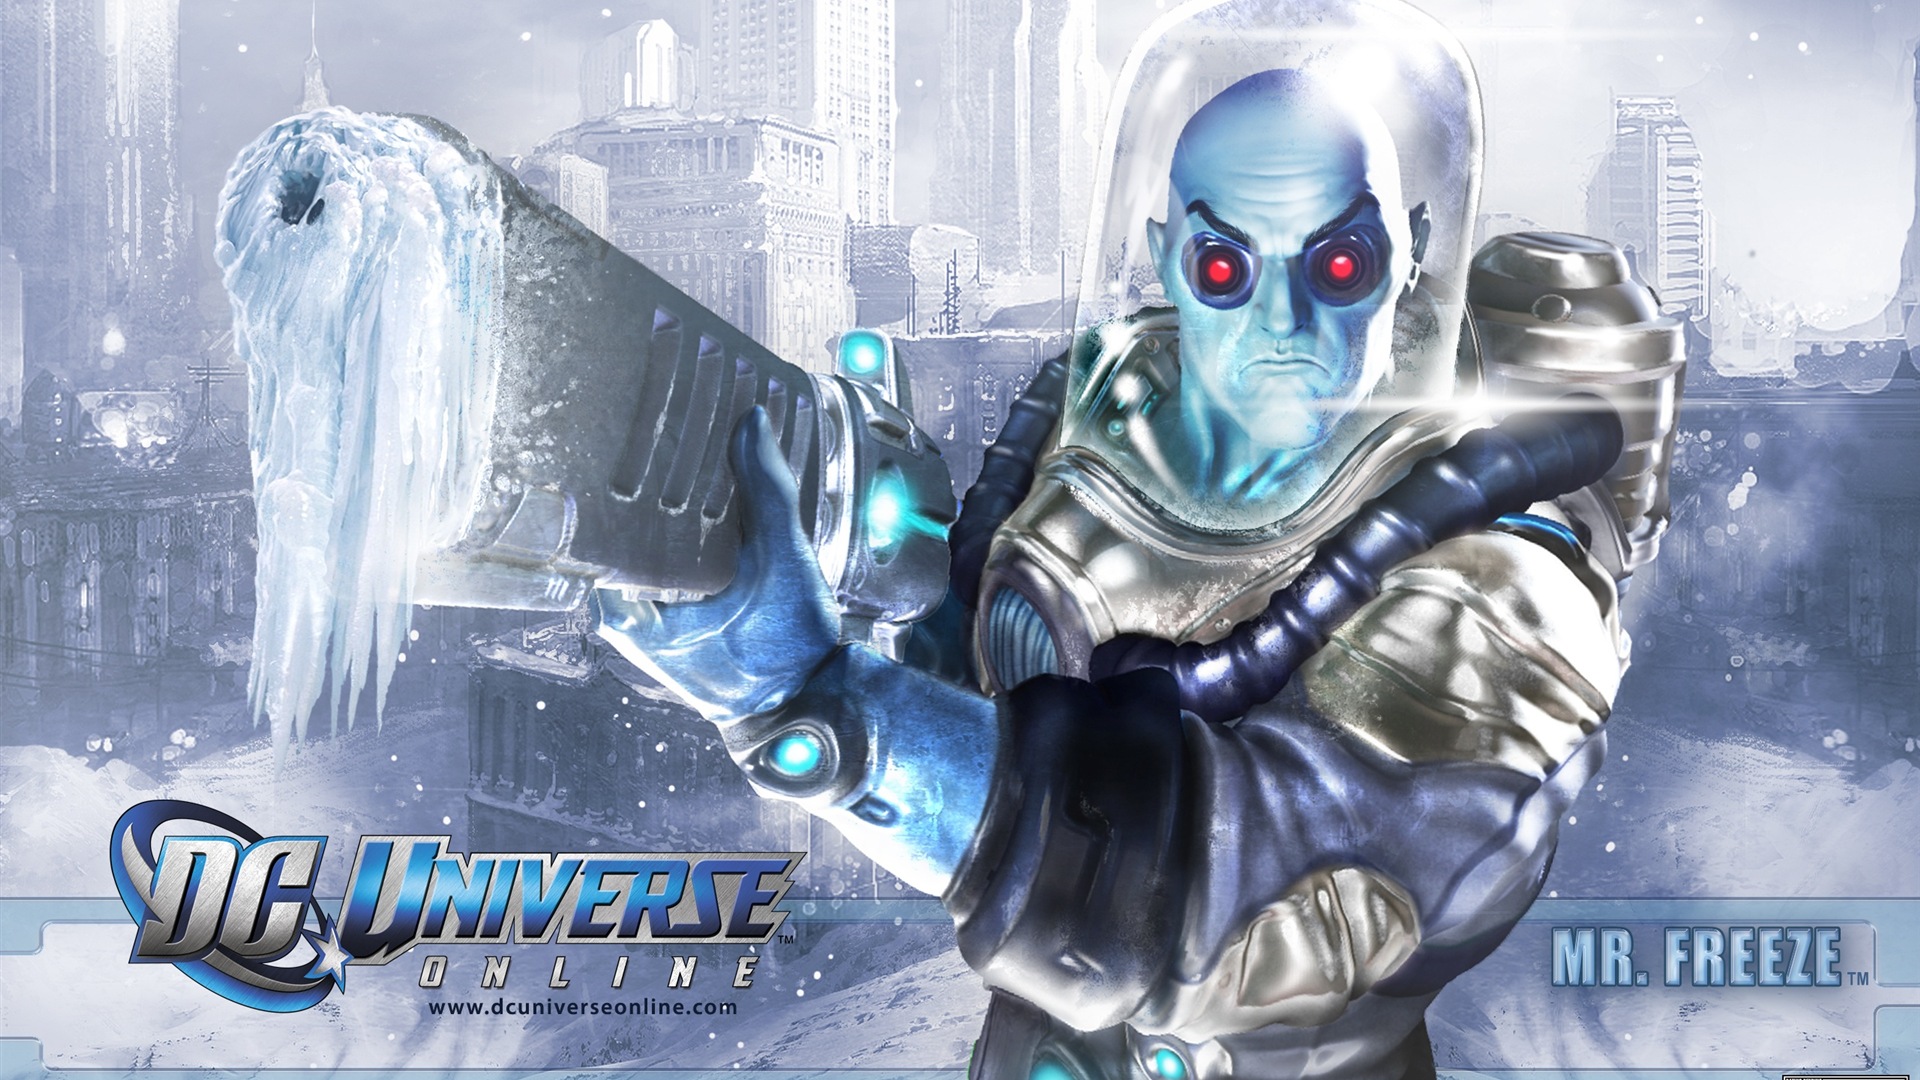 DC Universe Online HD game wallpapers #20 - 1920x1080